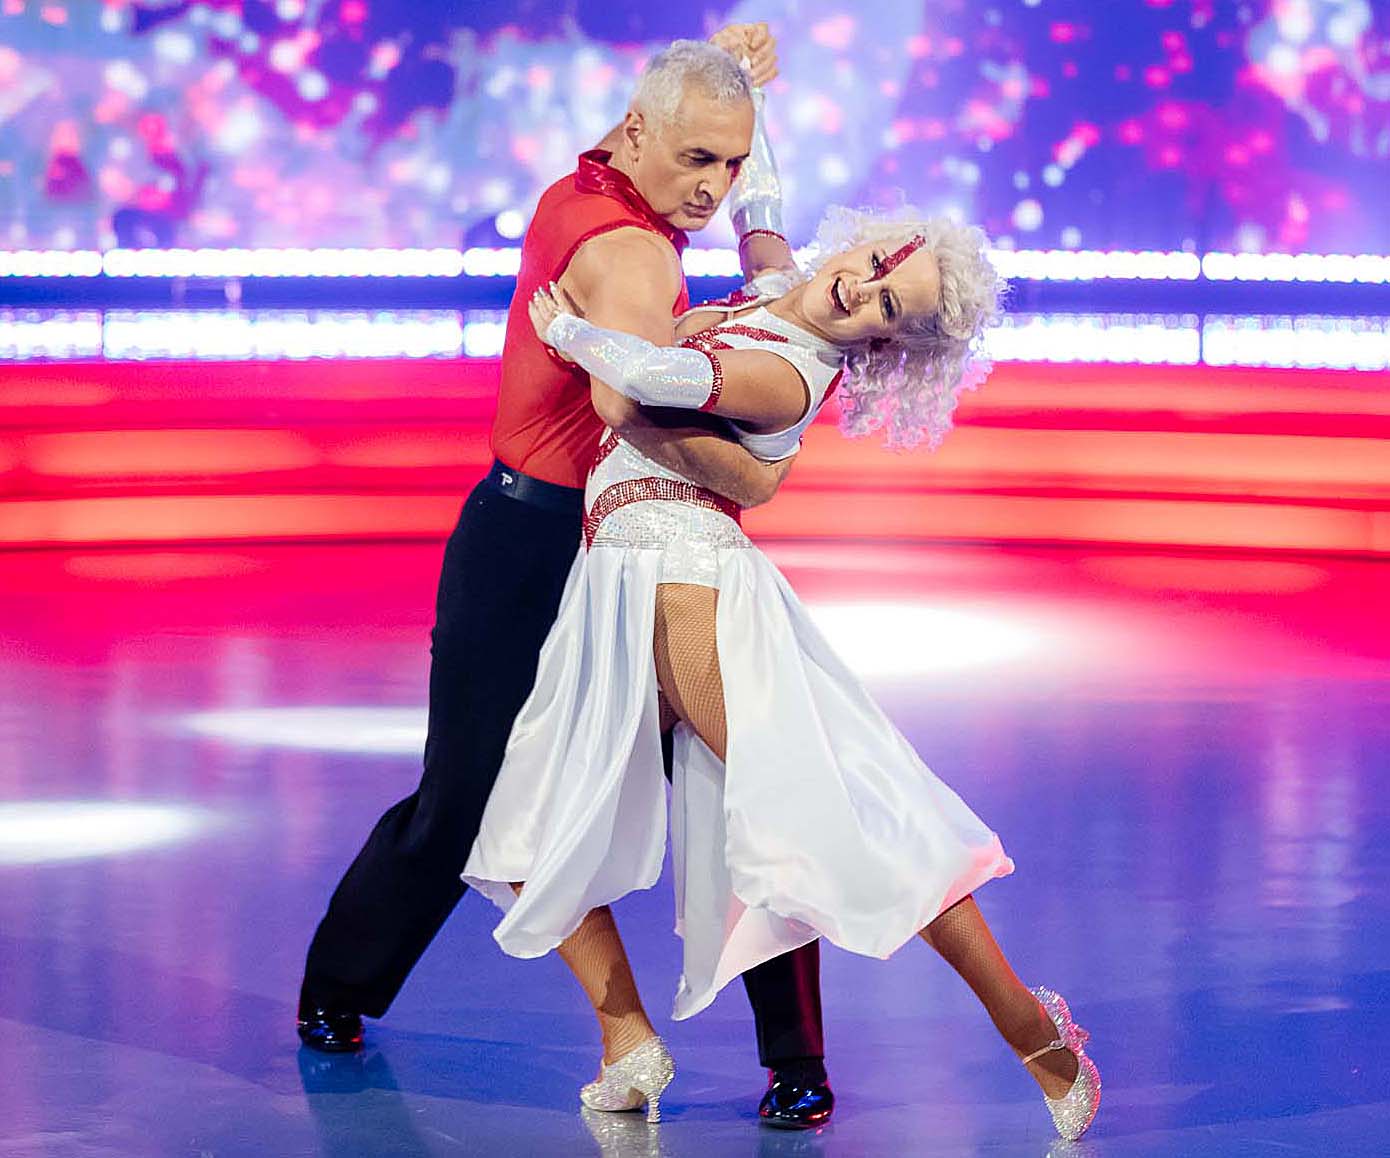 Mike McRoberts turns to his mum for support after his disappointing elimination from Dancing With The Stars